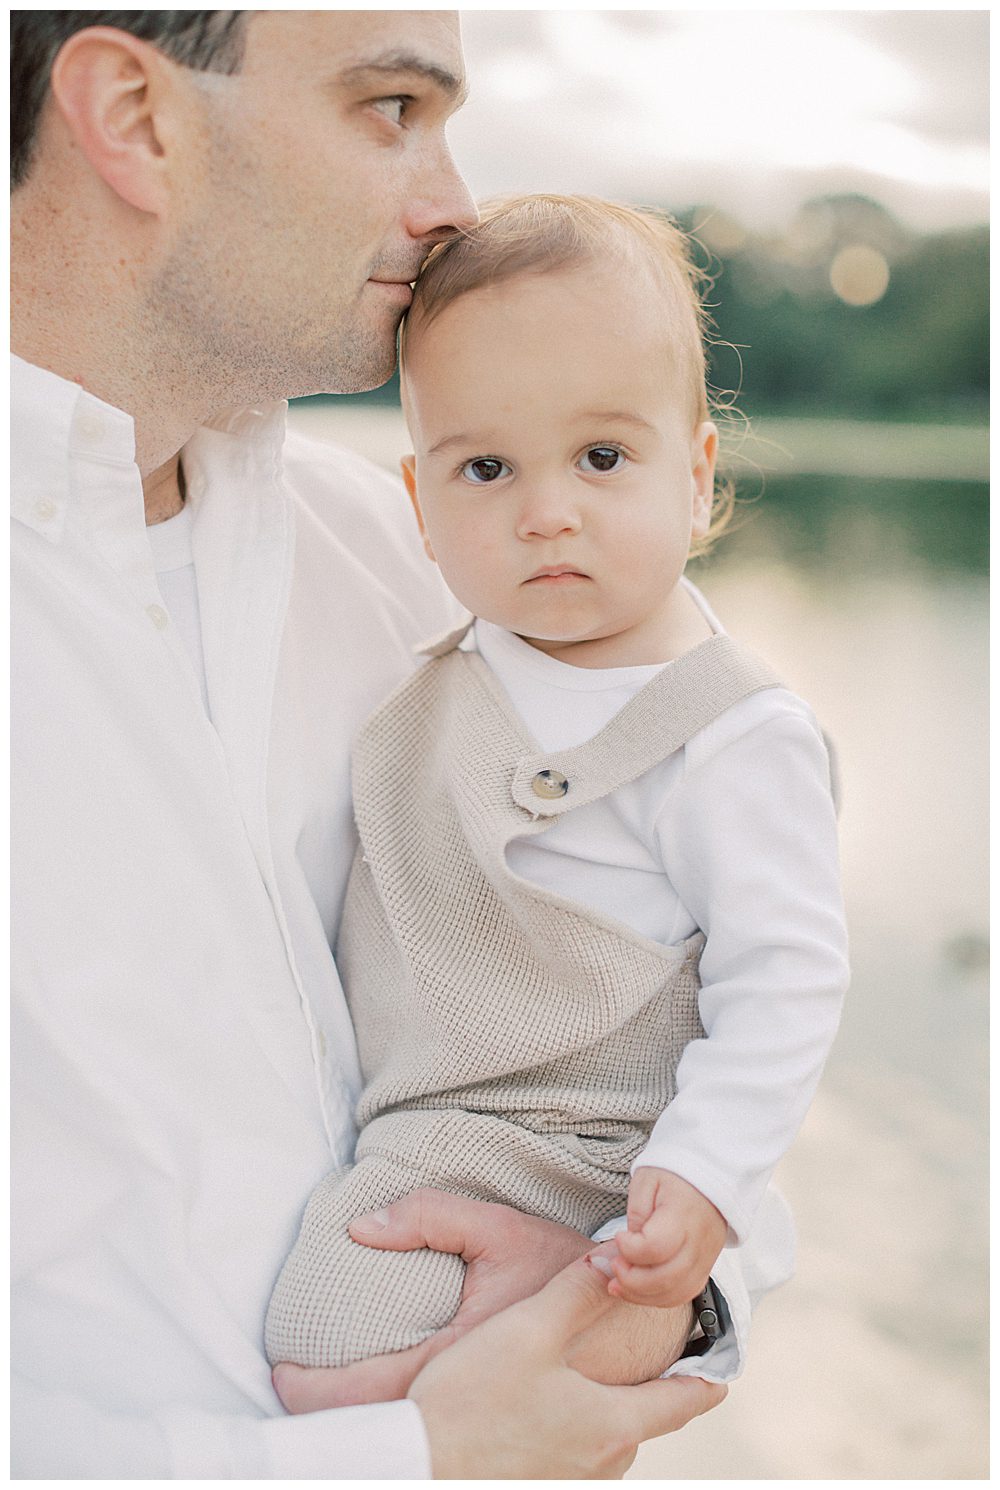 Father kisses his son's head during DC family photo session.